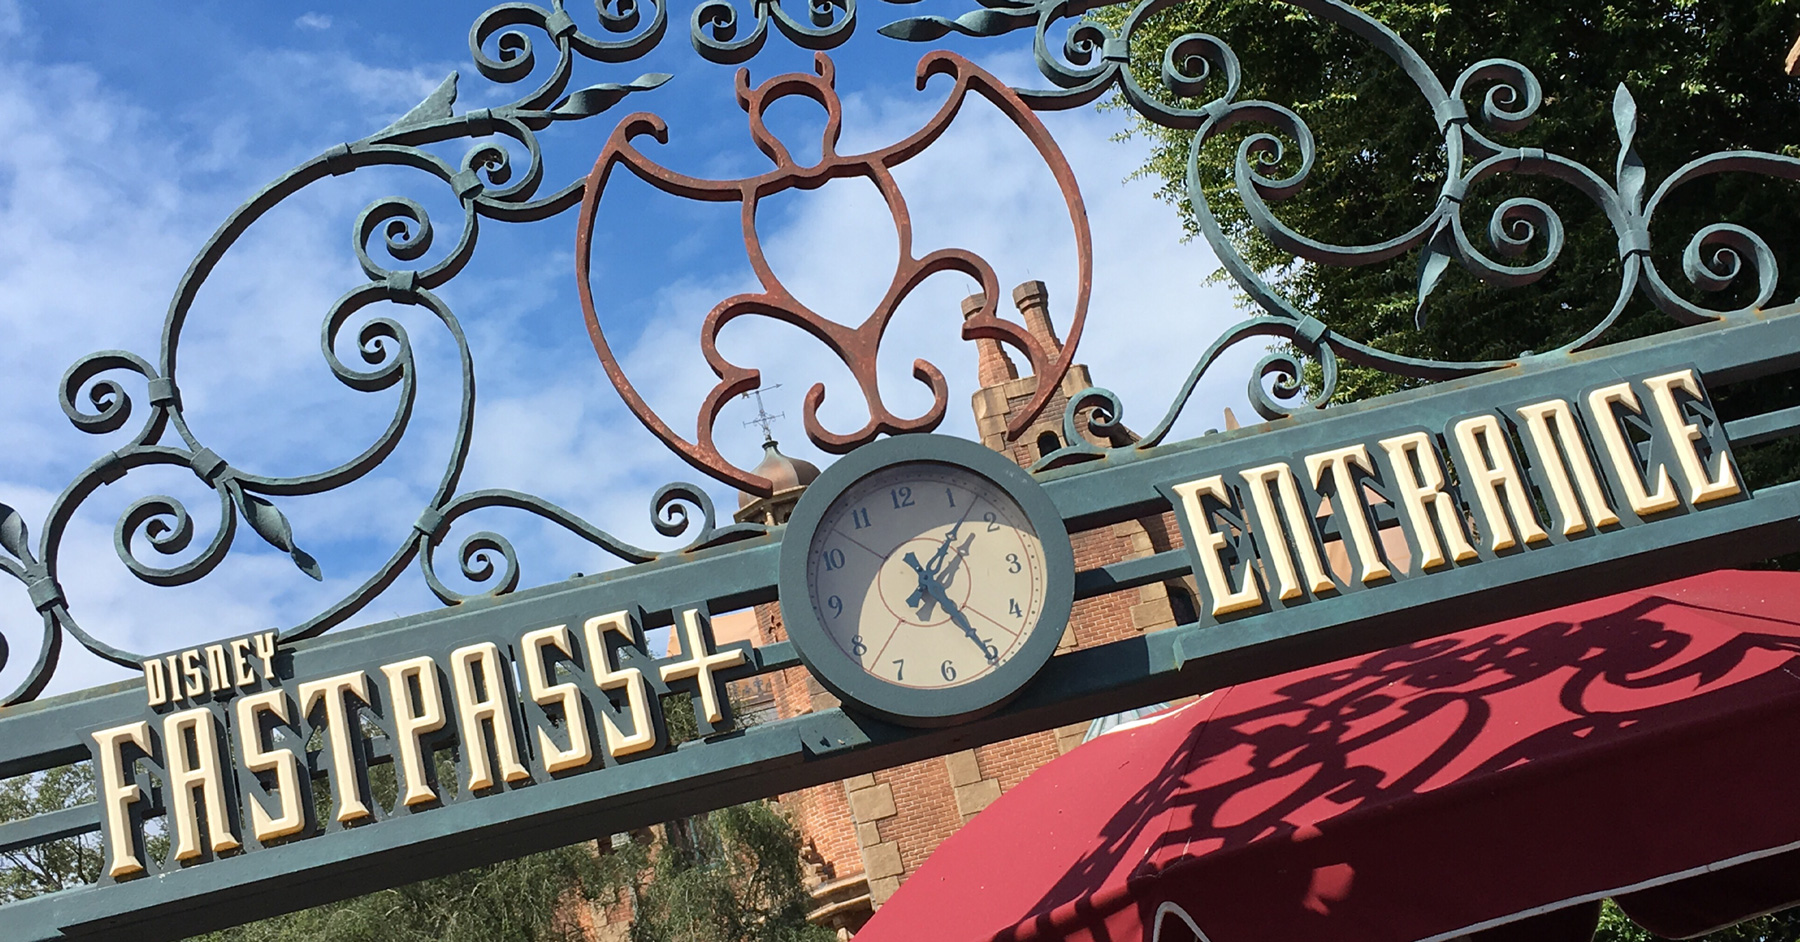 Disney Fast Pass entrance sign at Hasted Mansion in Magic Kingdom